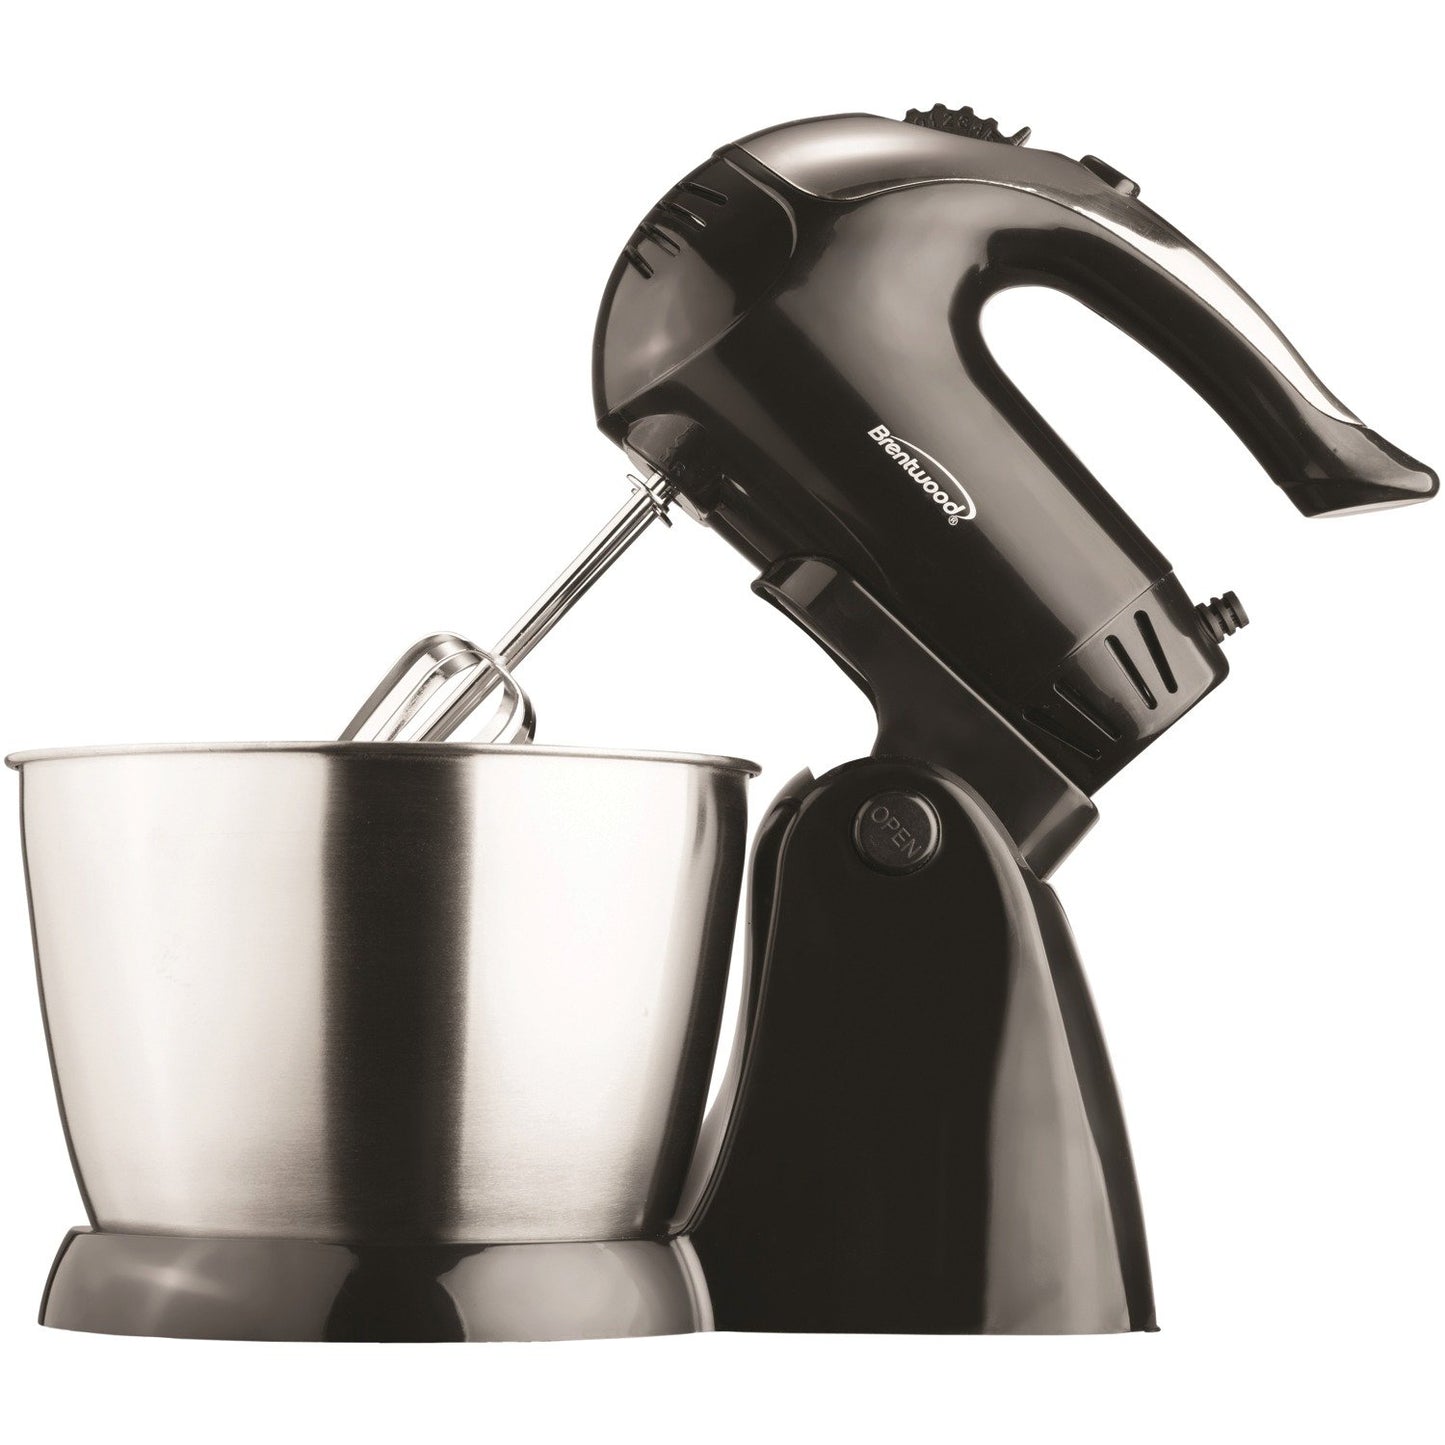 Brentwood Appliances SM-1153 5-Speed + Turbo Electric Stand Mixer w/Bowl